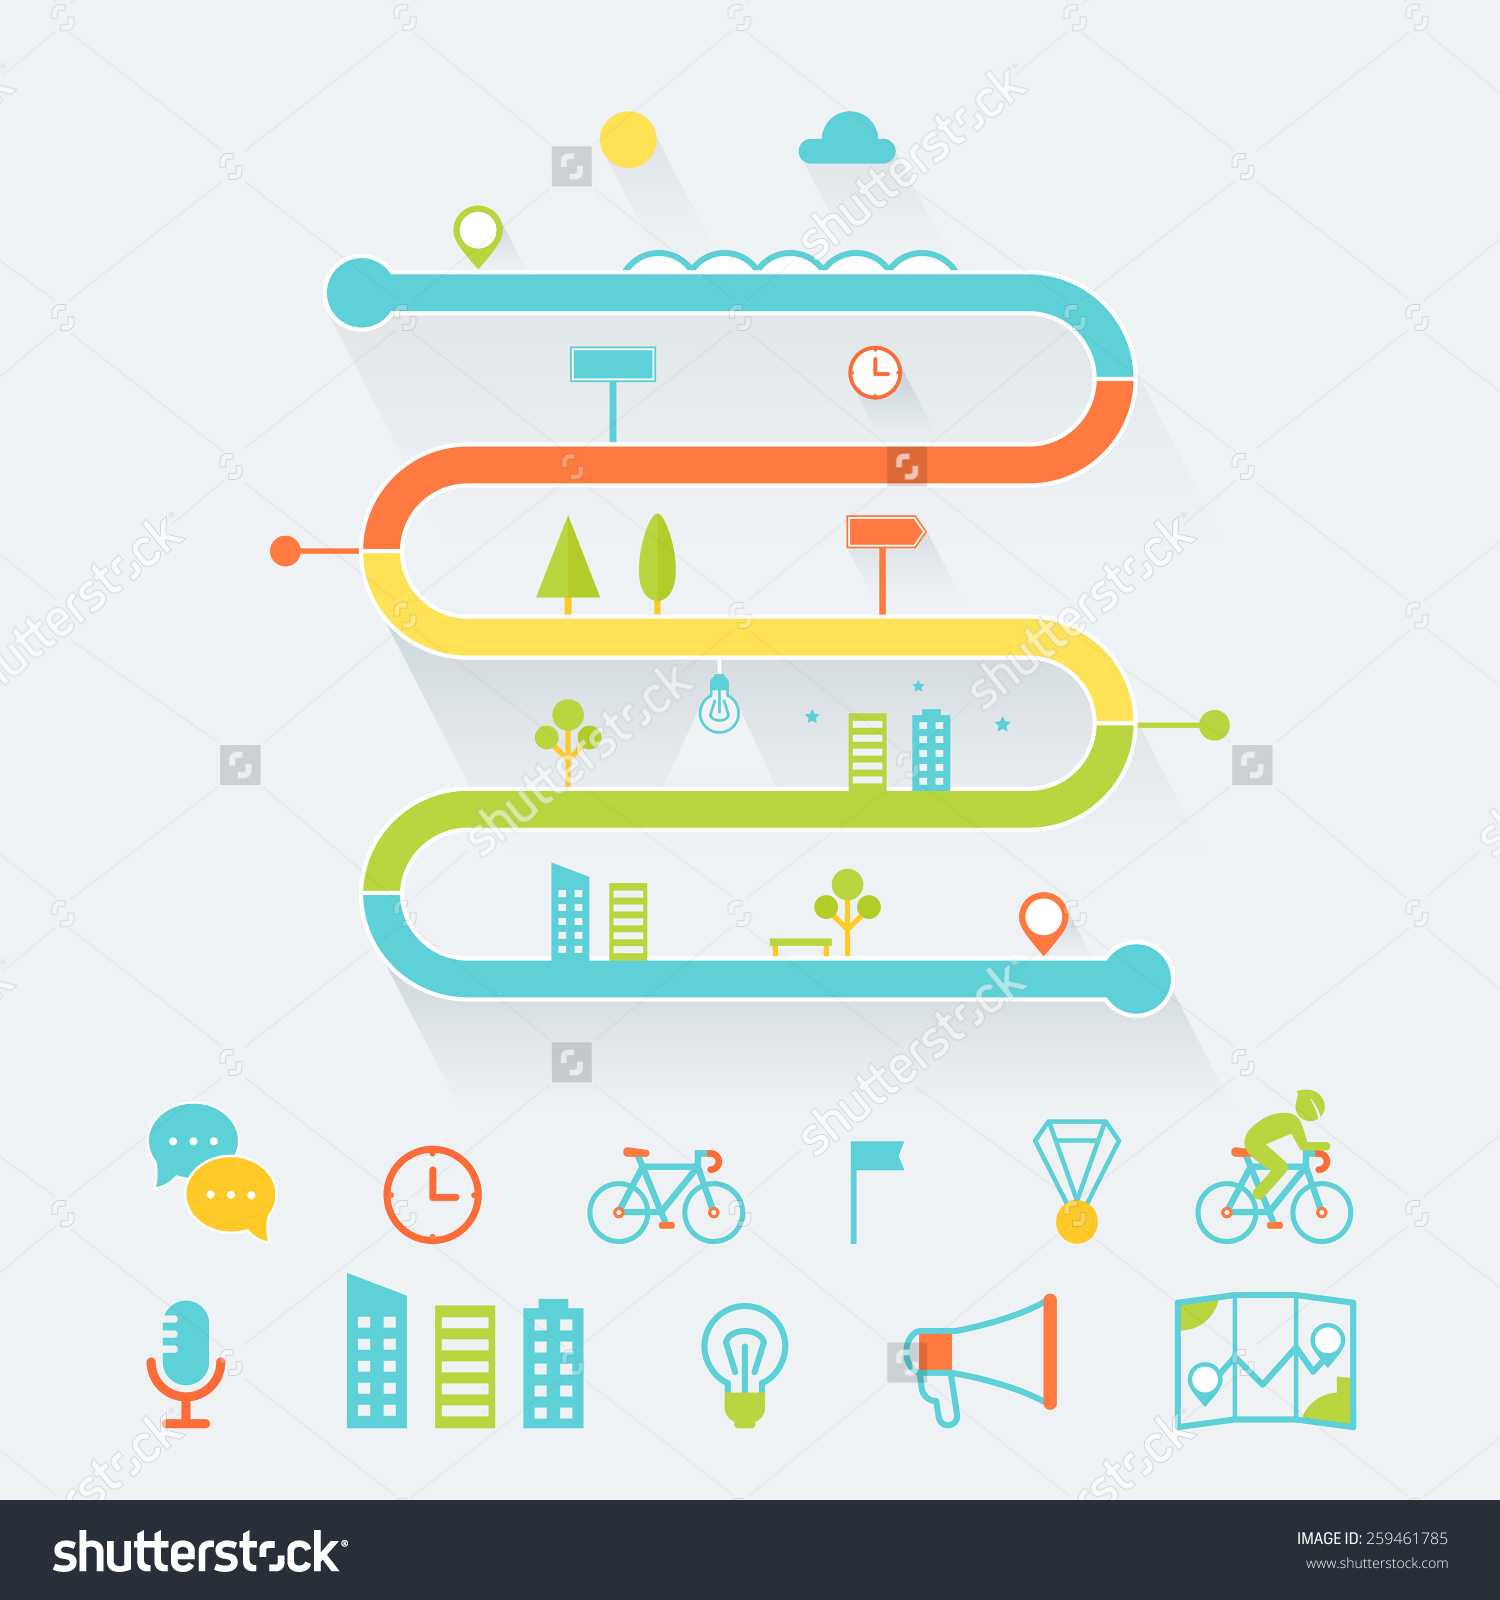 Library Of Timeline Road Map Svg Transparent Download Png With Blank Road Map Template